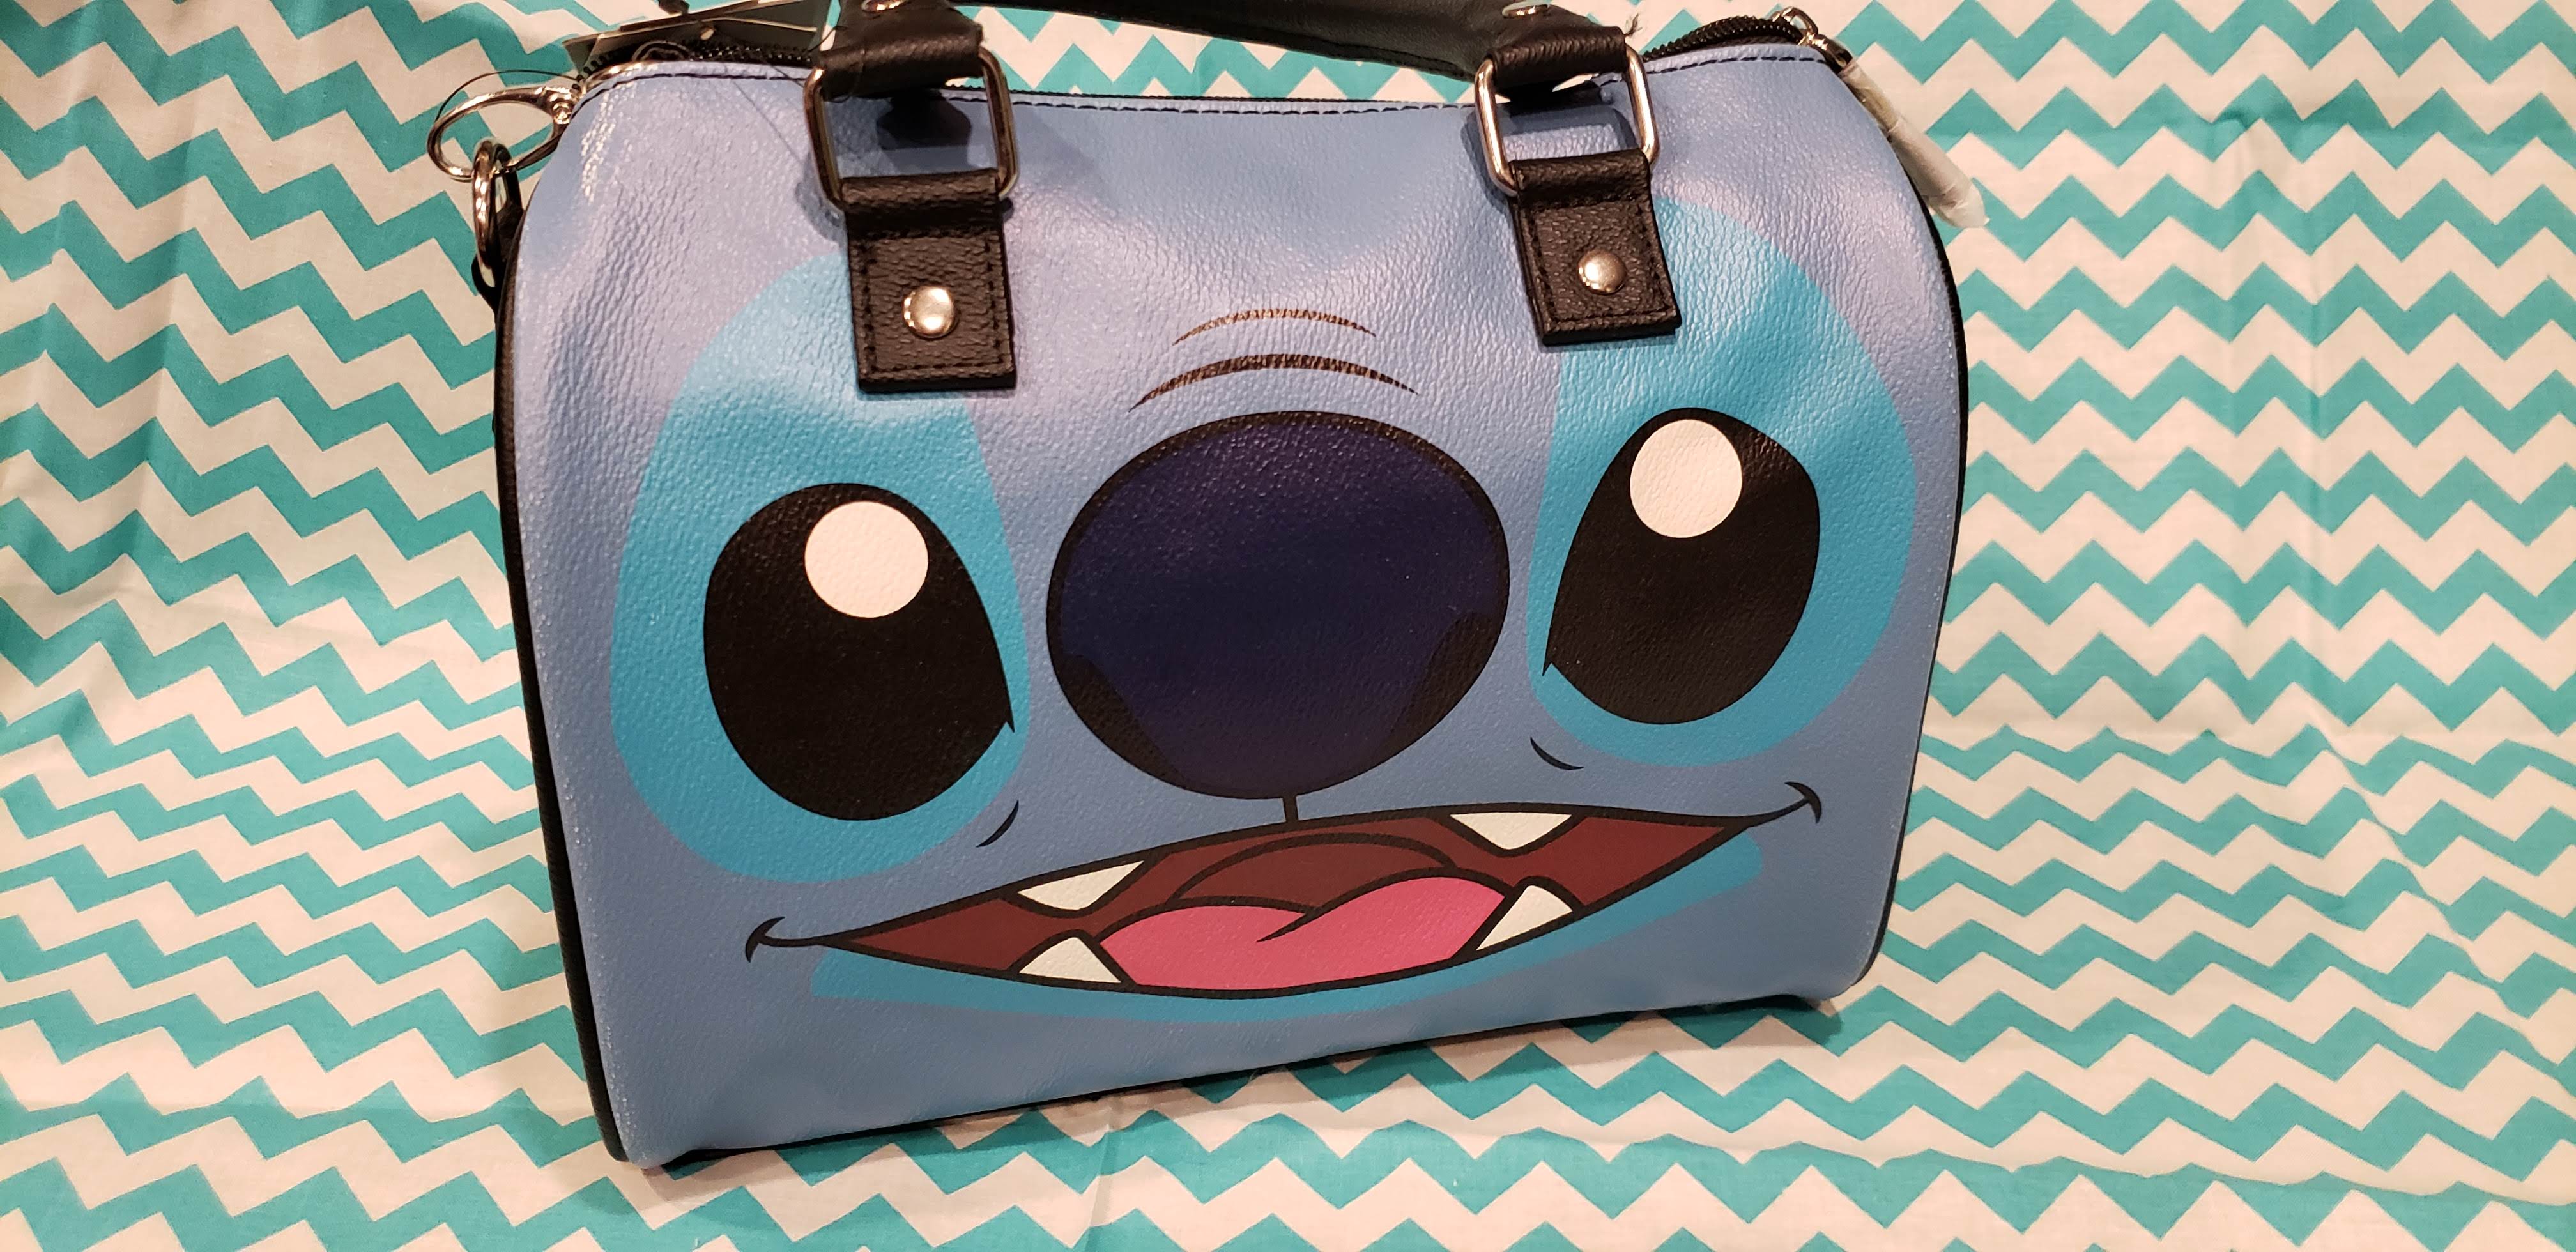 Loungefly - Check out our Hot Topic exclusive Lilo & Stitch Camera Bag!  Comment below with your favorite Disney movie quote for a chance to win! |  Facebook